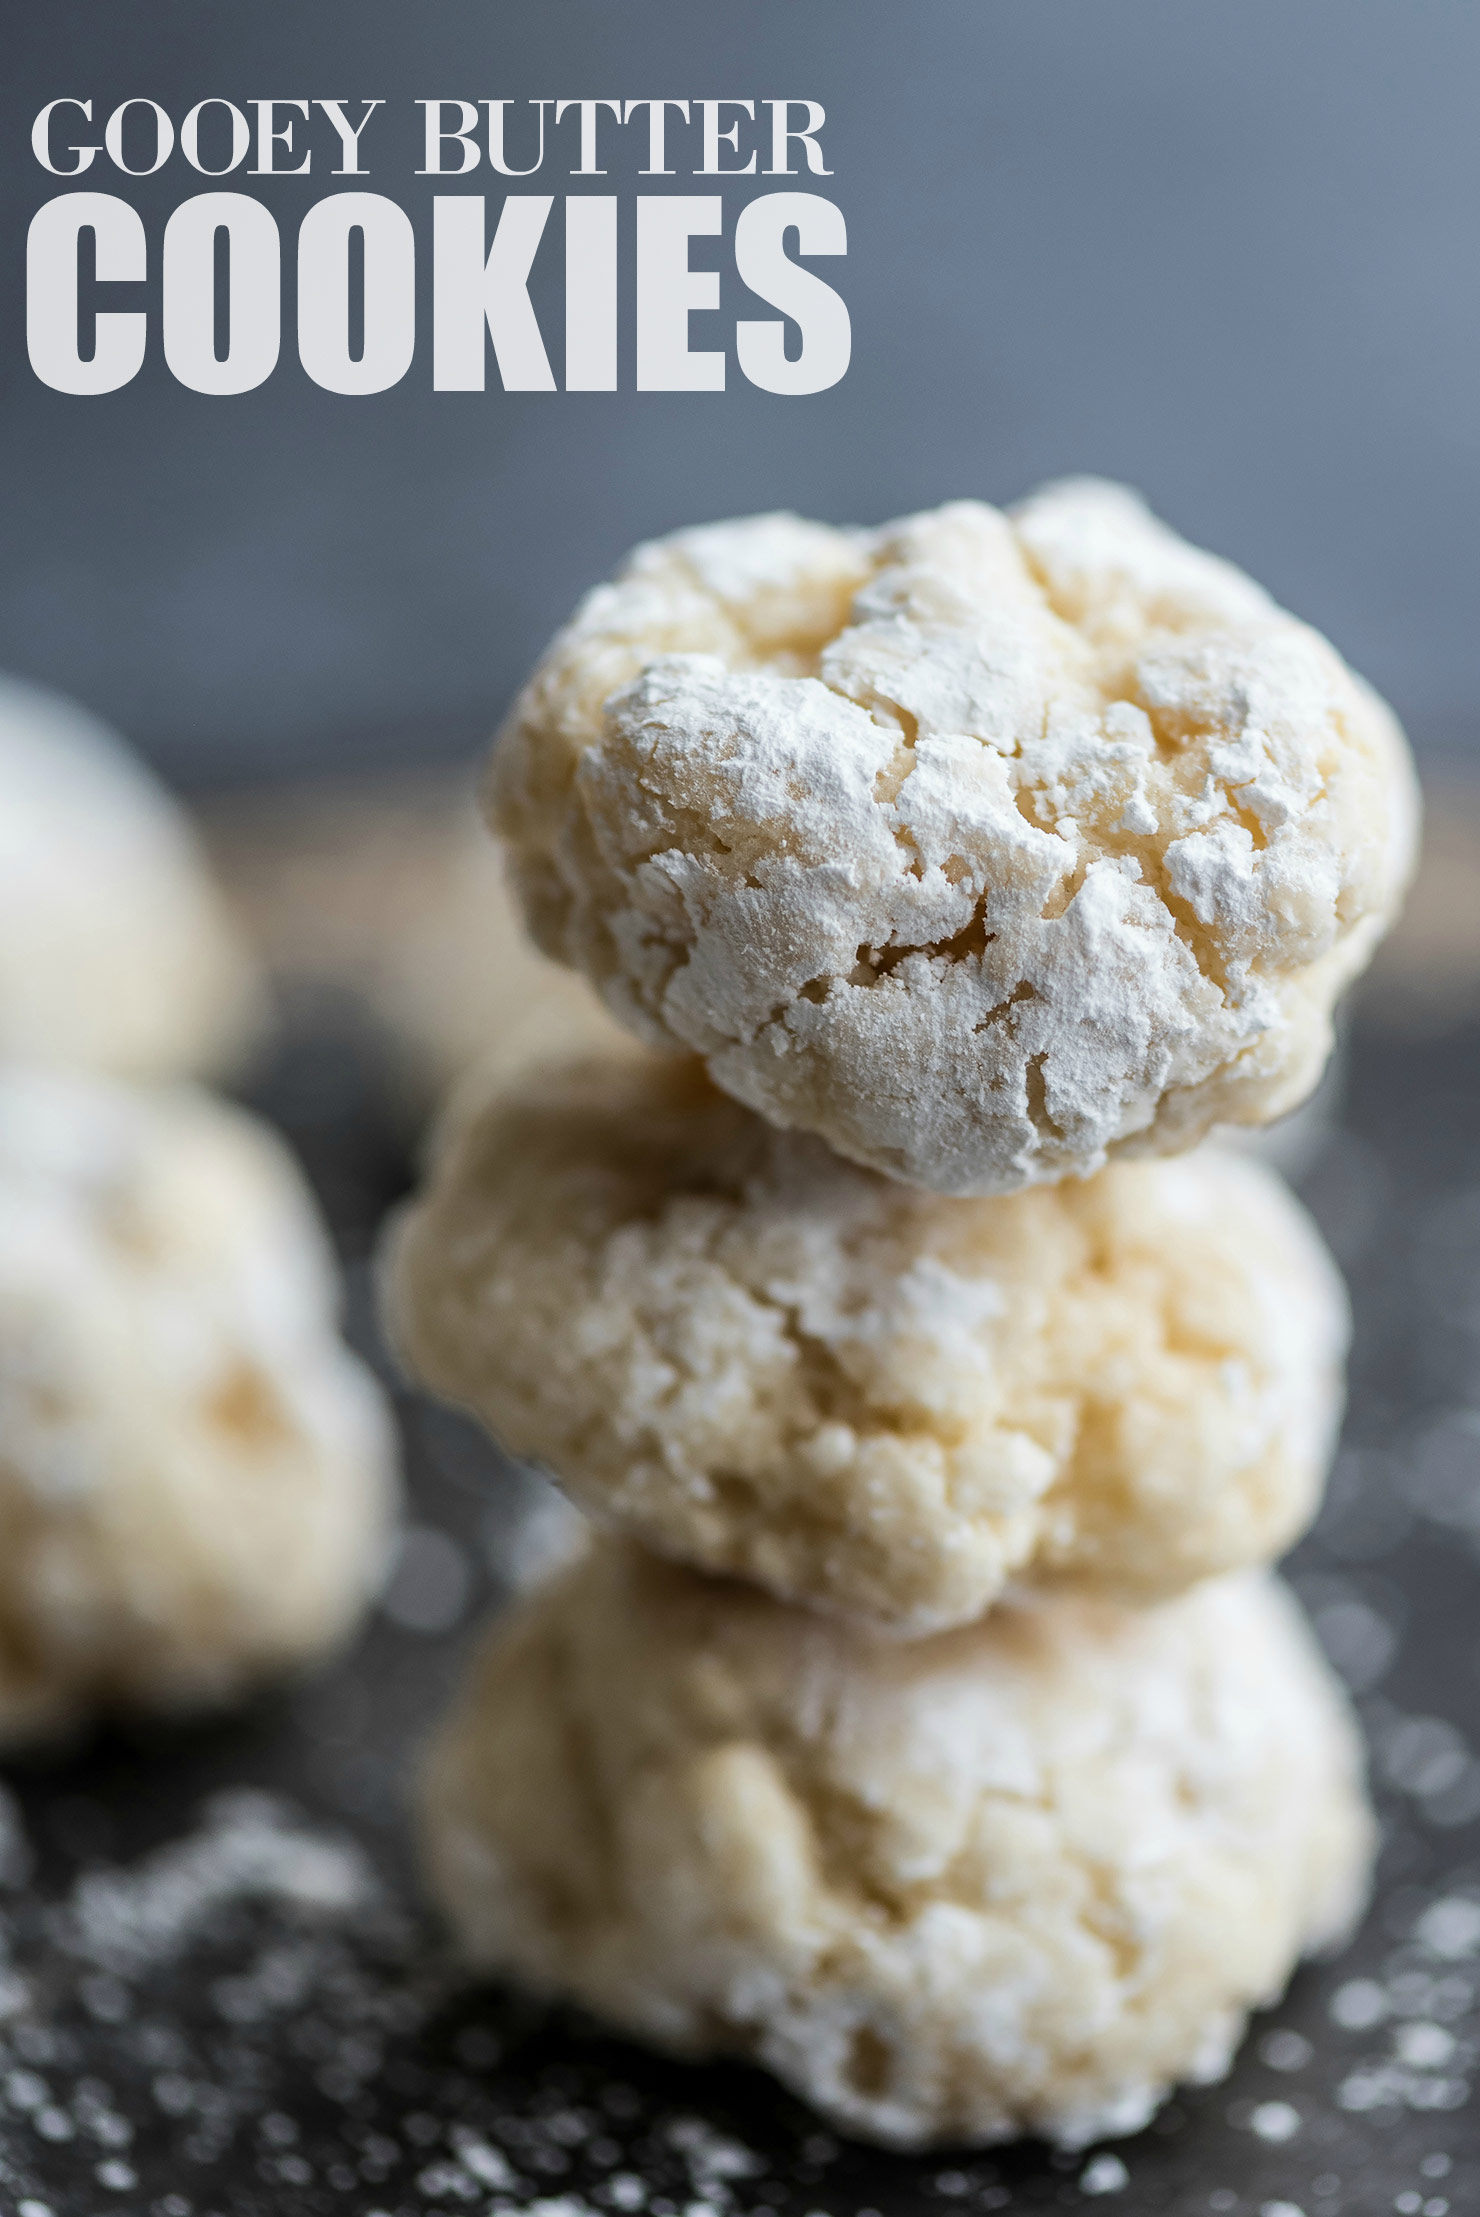 Gooey Butter Cookies | Kailley's Kitchen